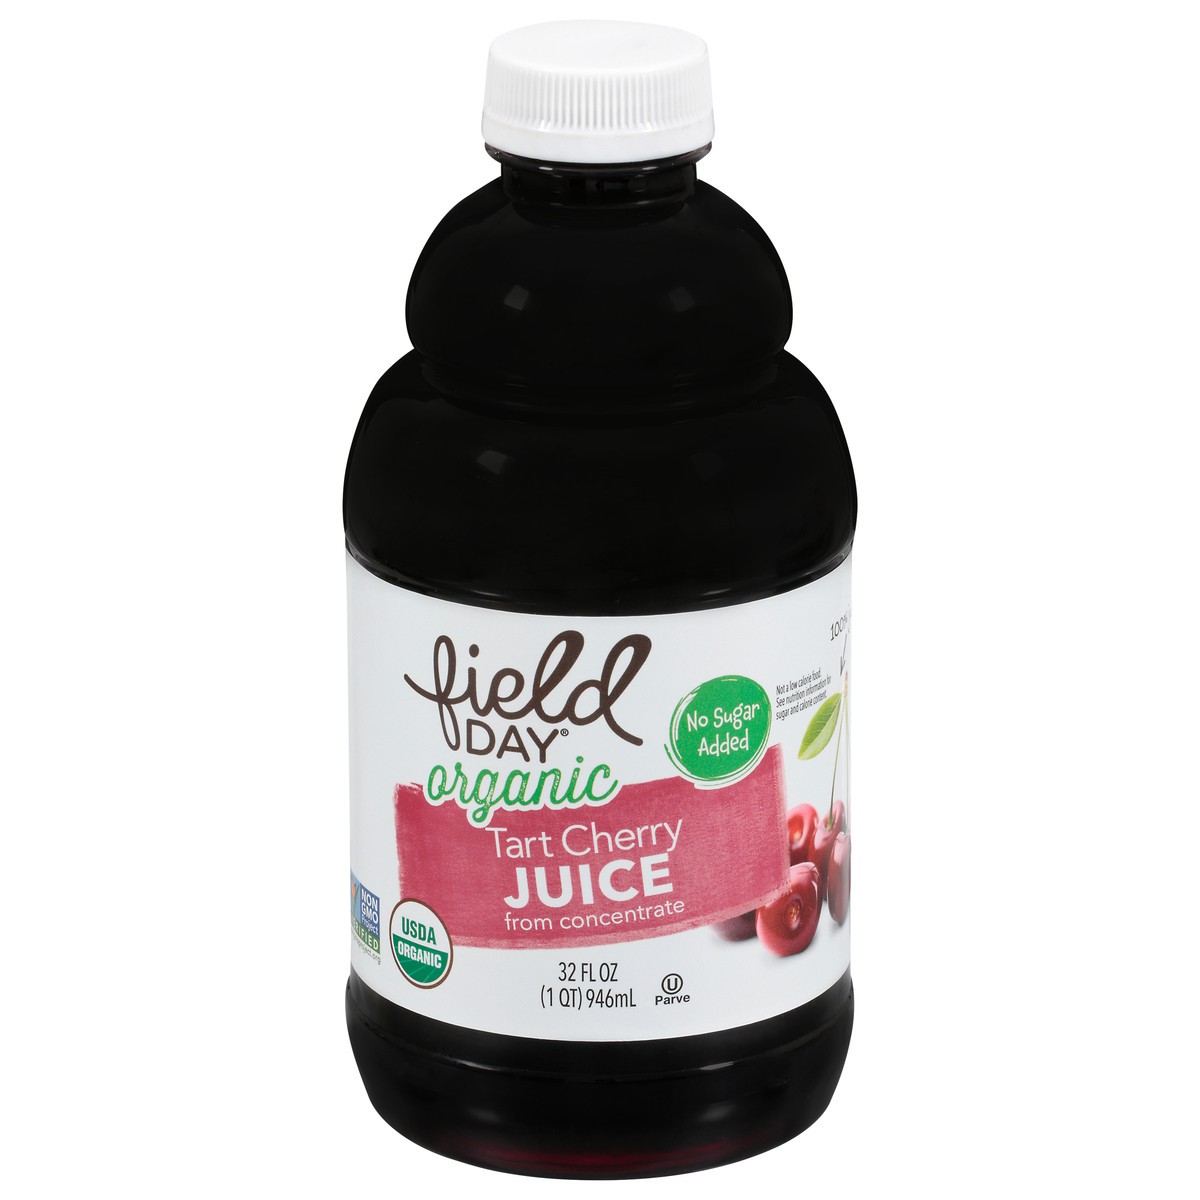 slide 8 of 13, Field Day Organic Tart Cherry Juice from Concentrate 32 fl oz, 32 oz